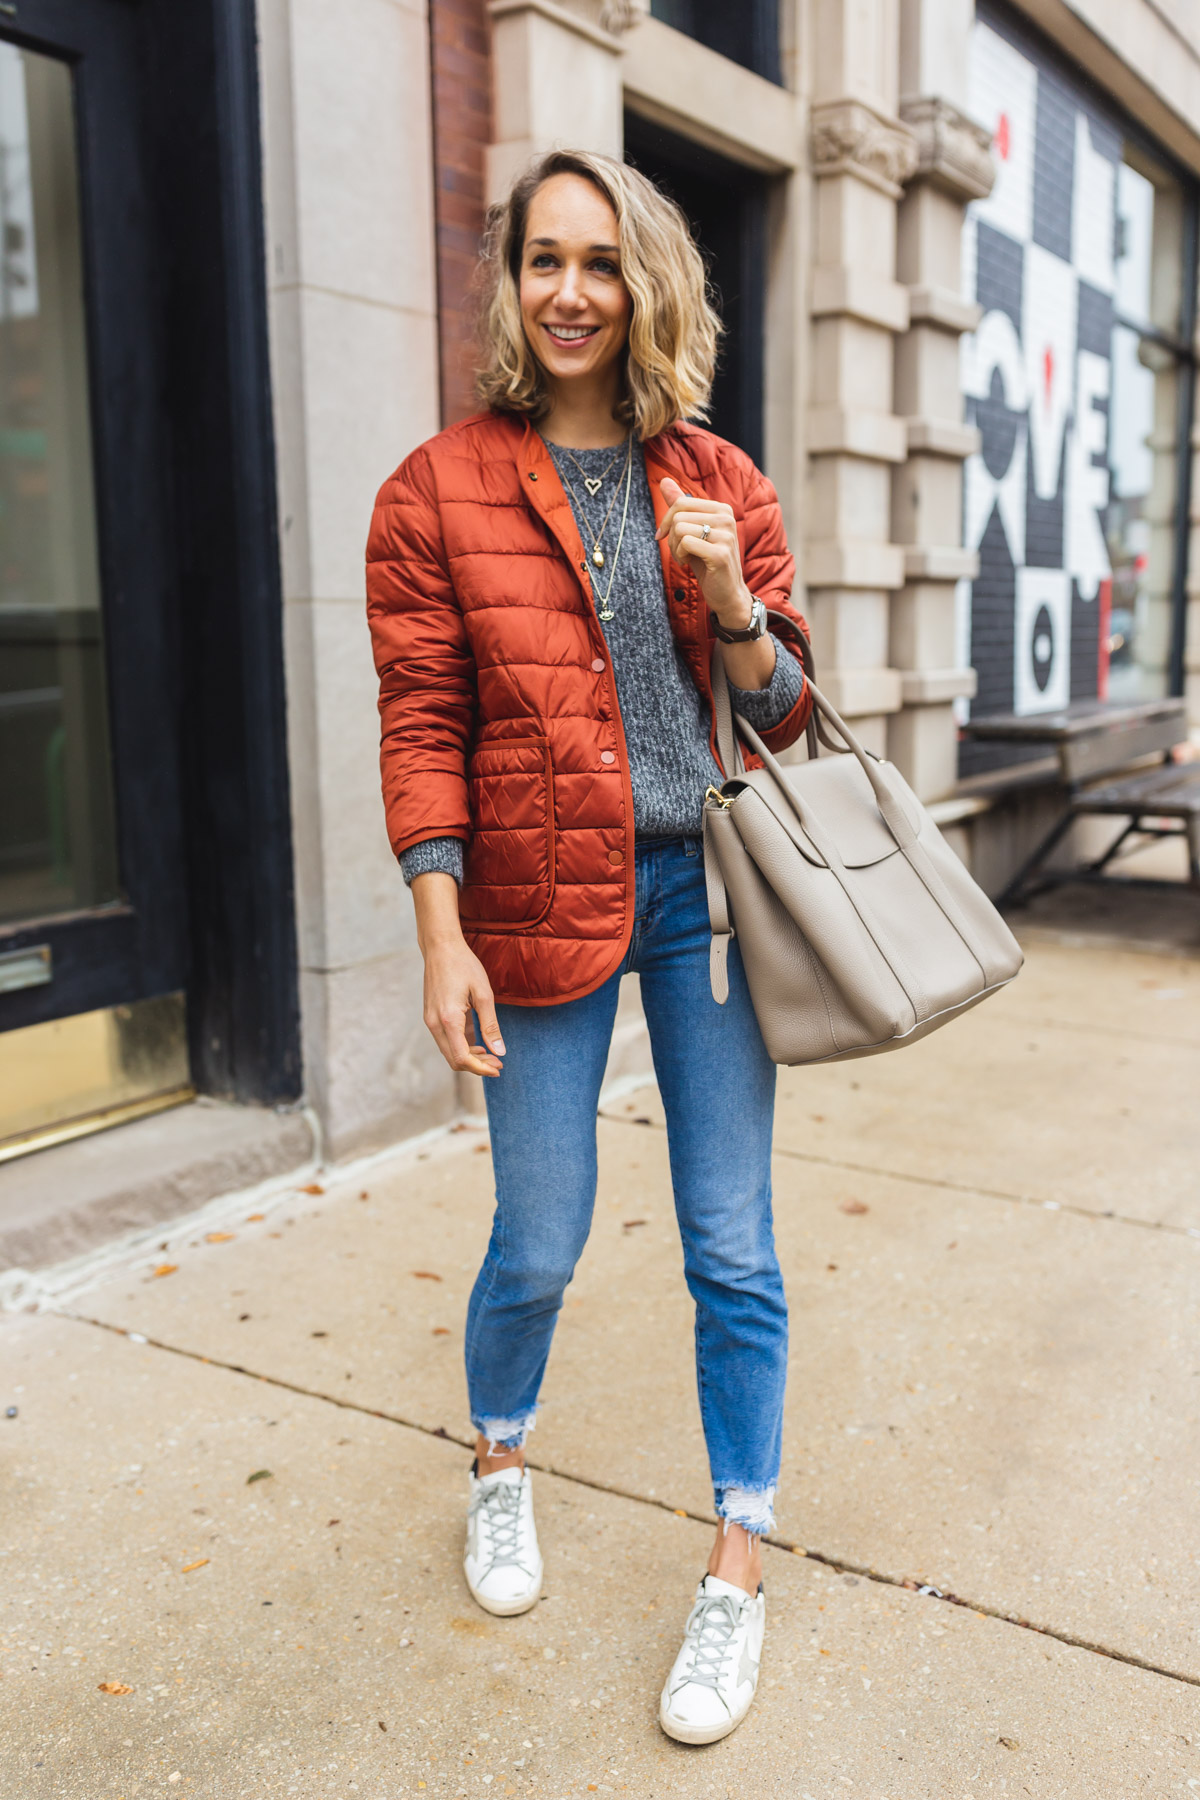 puffy jacket outfit